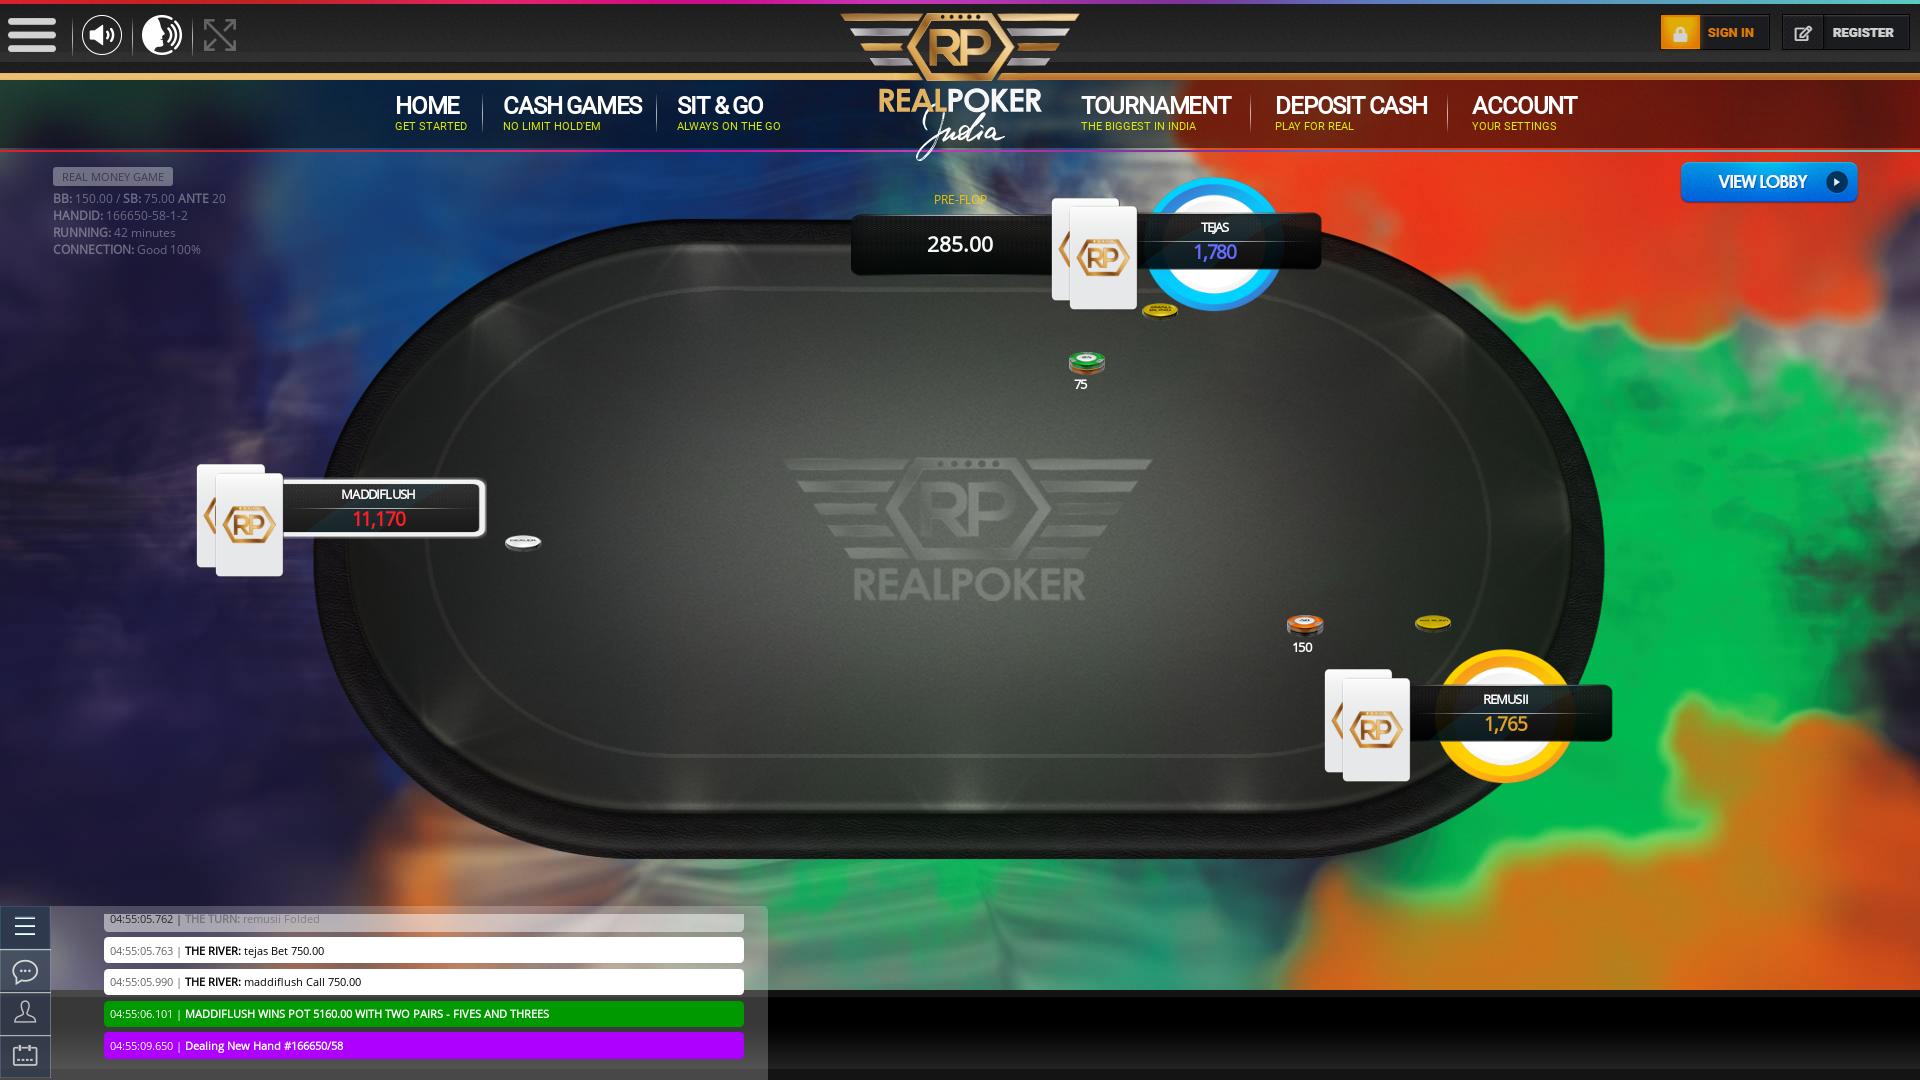 Indian online poker on a 10 player table in the 42nd minute match up